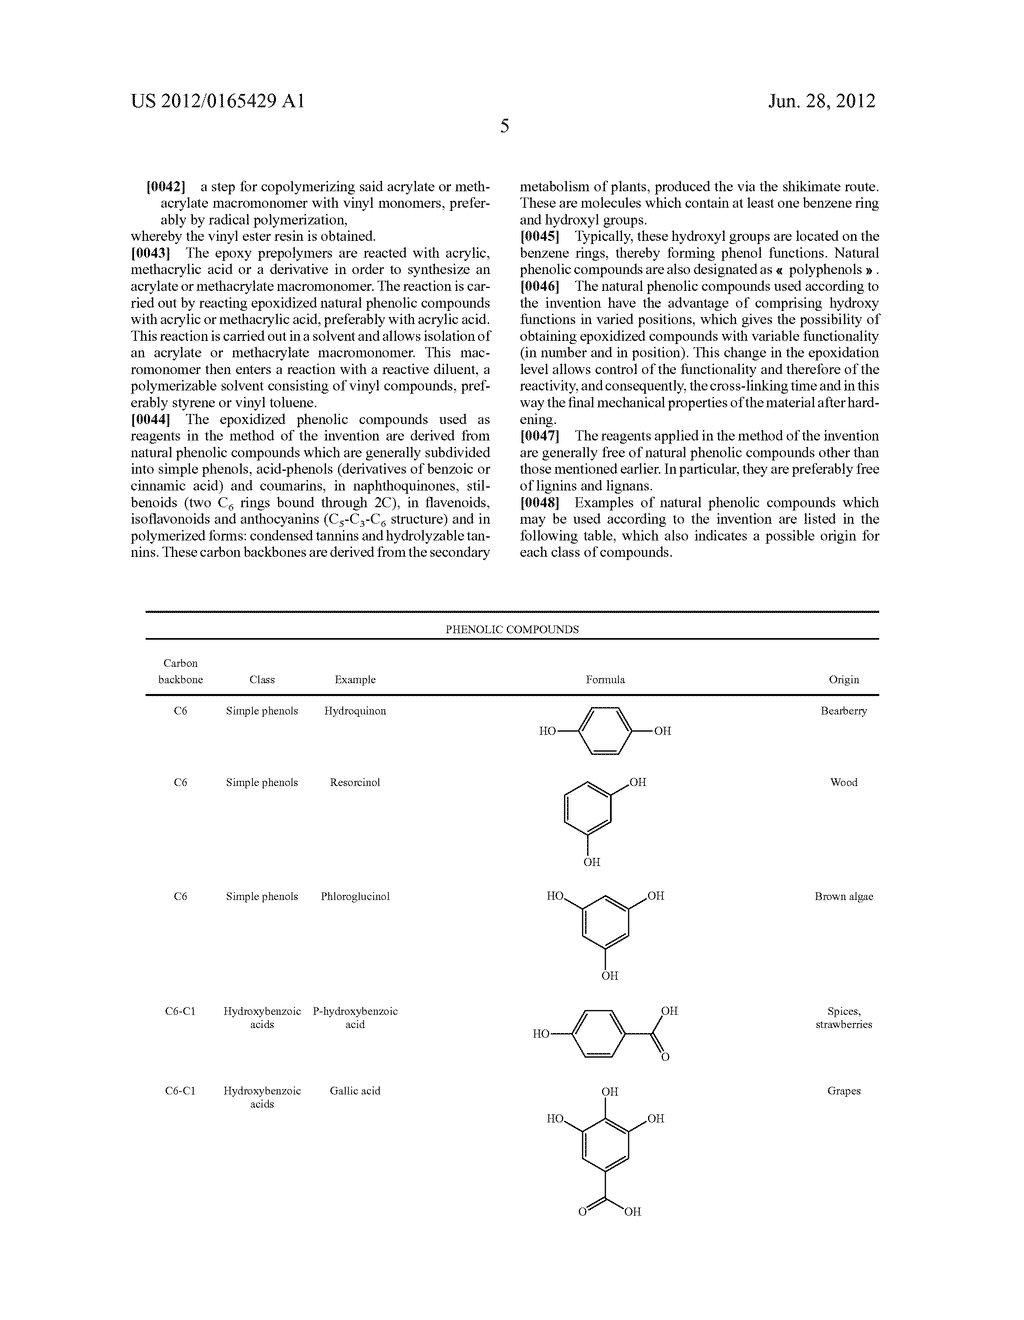 NOVEL METHODS FOR PRODUCING THERMOSETTING EPOXY RESINS - diagram, schematic, and image 13